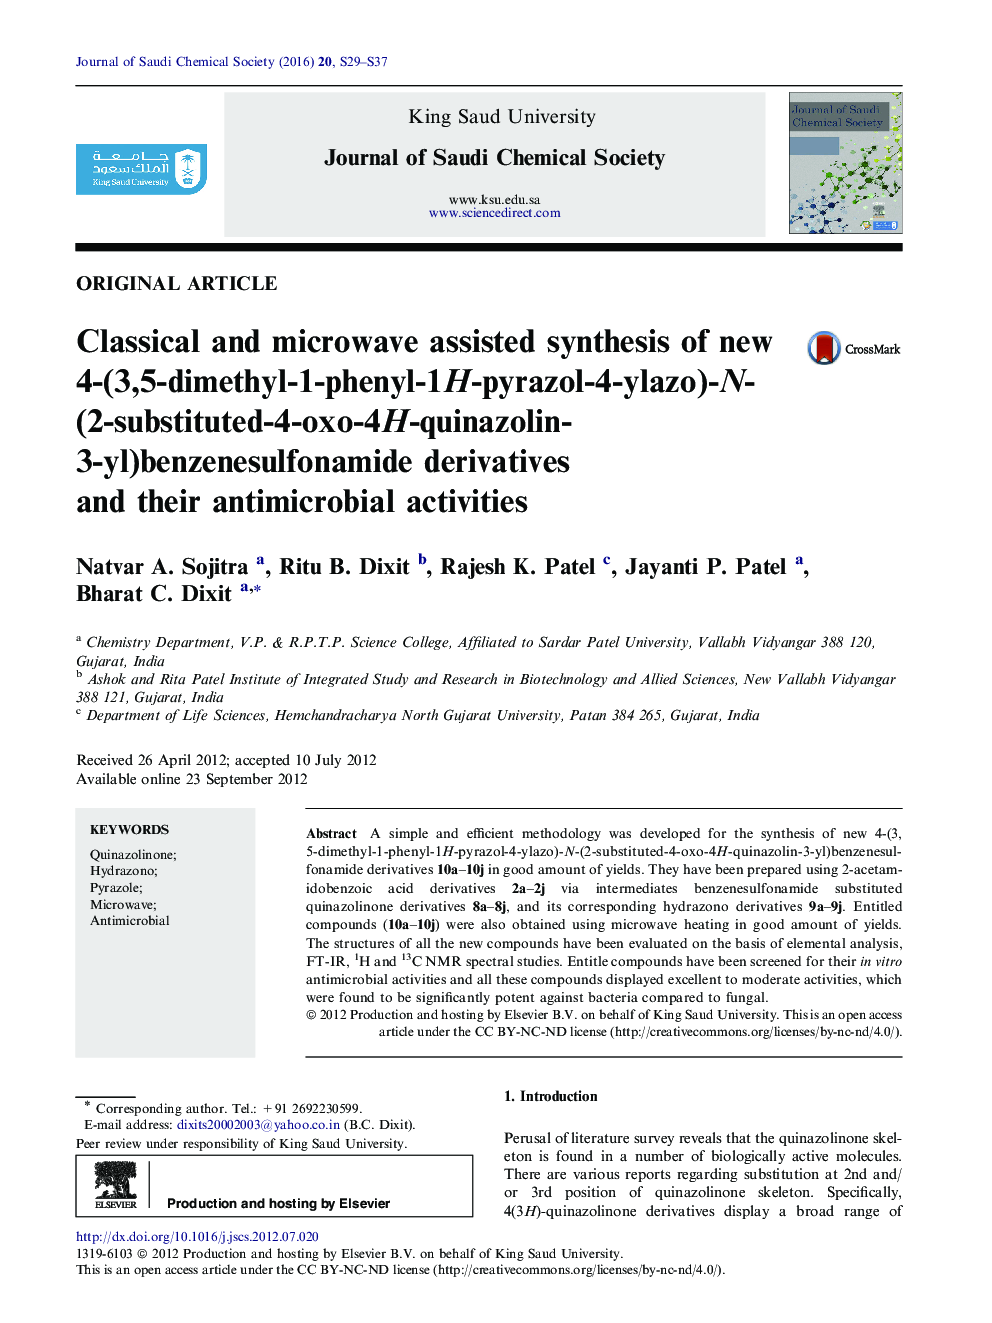 Classical and microwave assisted synthesis of new 4-(3,5-dimethyl-1-phenyl-1H-pyrazol-4-ylazo)-N-(2-substituted-4-oxo-4H-quinazolin-3-yl)benzenesulfonamide derivatives and their antimicrobial activities